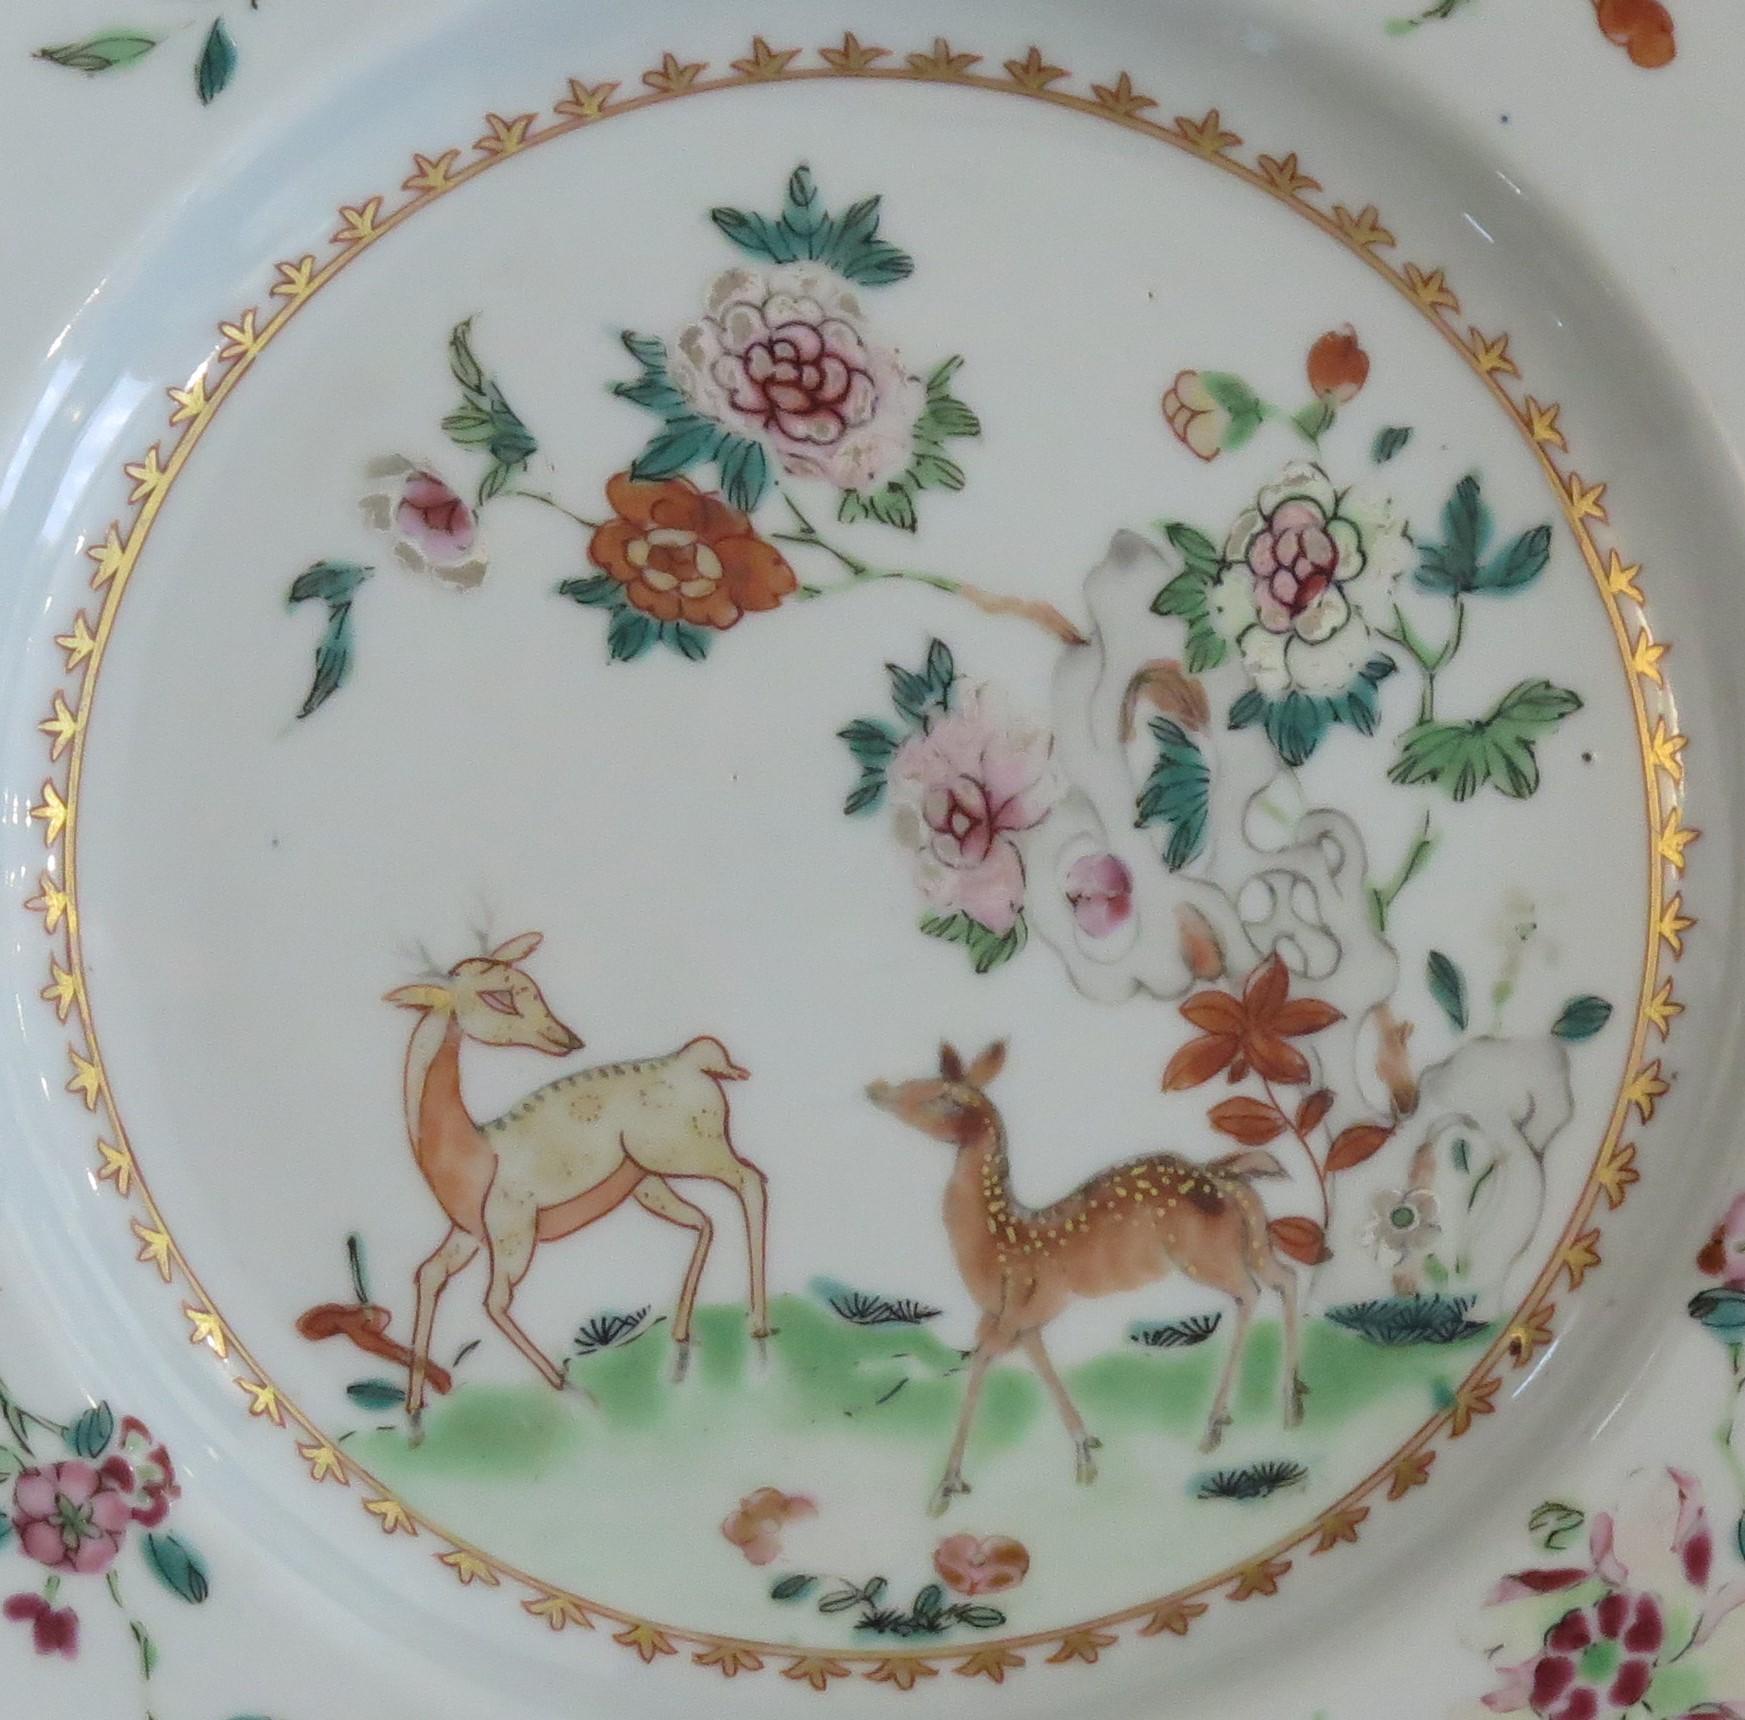 This is a beautifully hand painted example of a Chinese porcelain 18th Century plate, which we date to the Qing, Yongzheng period (1723-1735) or very early in the Qianlong period .

The plate is delicately hand decorated, overglaze, with enamels of